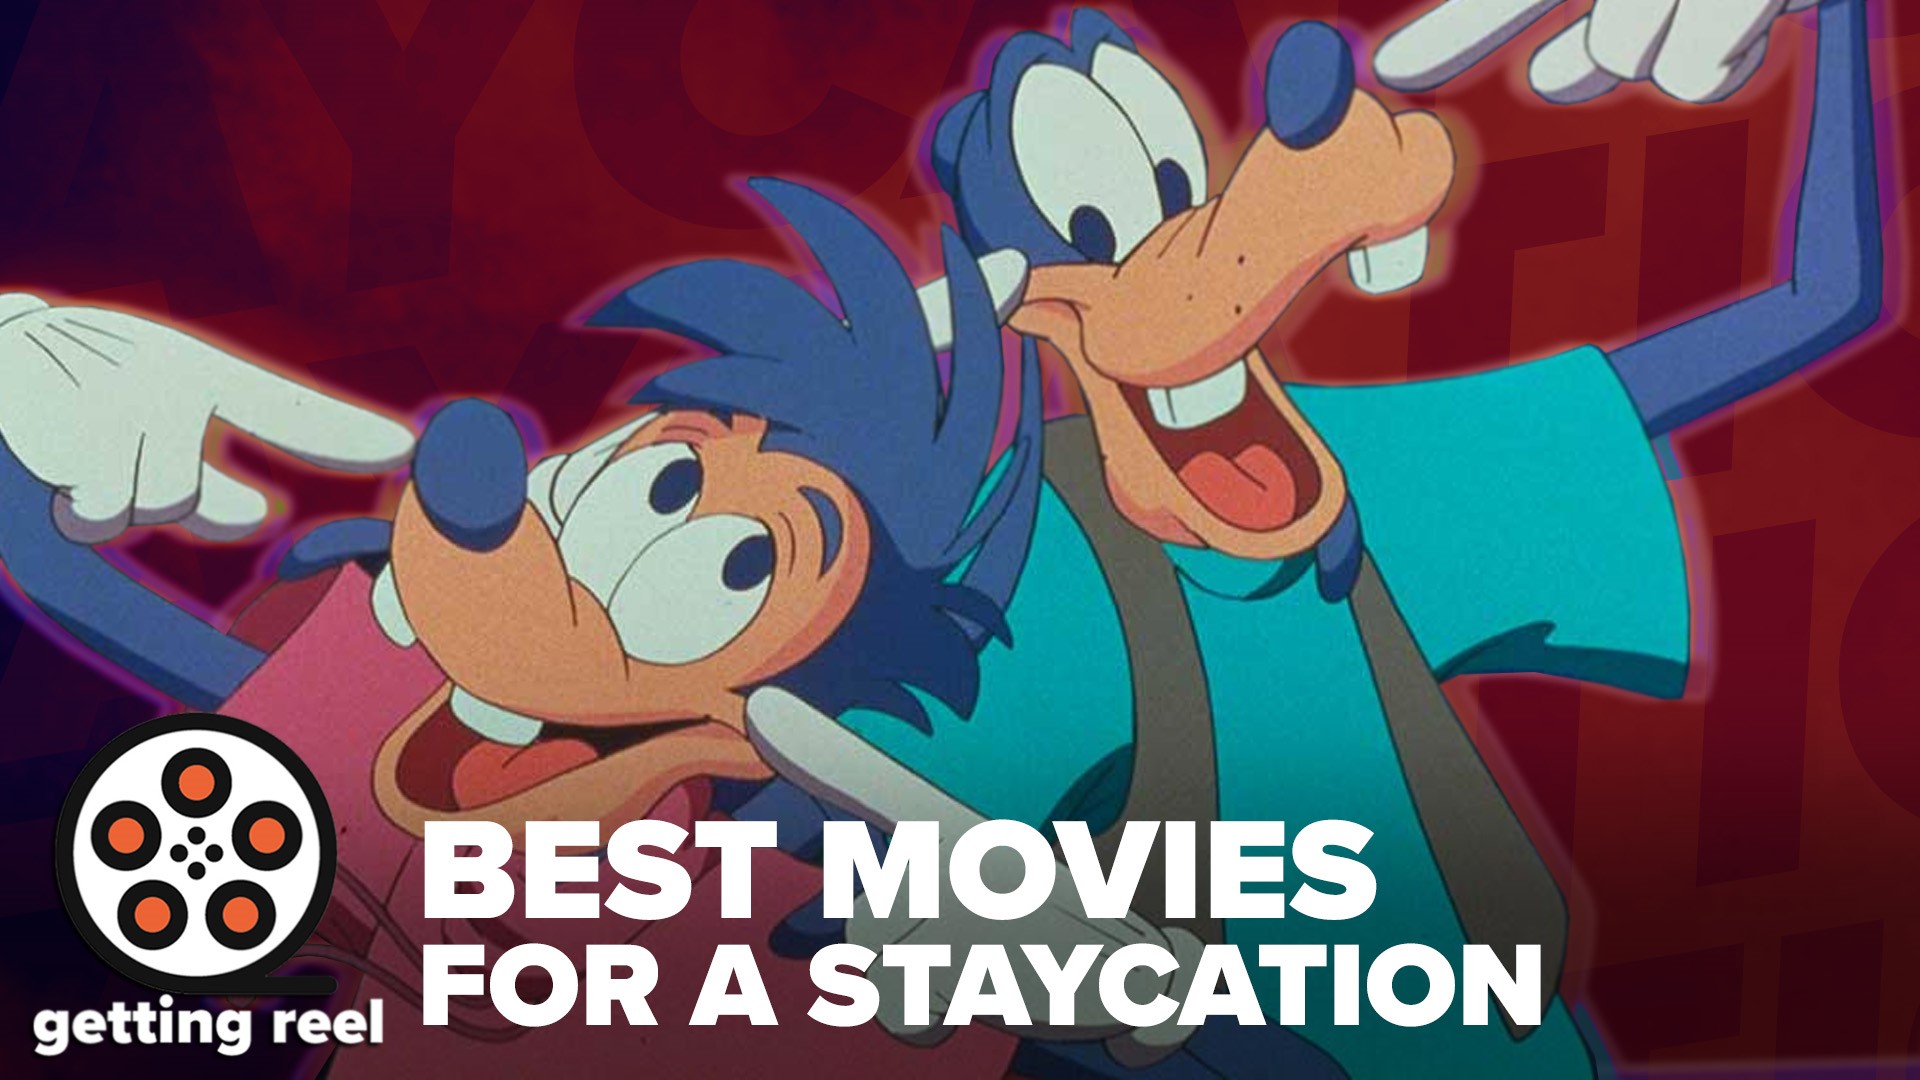 JD has picked his 3 favorite movies to watch while you're on staycation, a vacation, or even a road trip! And yes, he will defend A Goofy Movie until the end of time